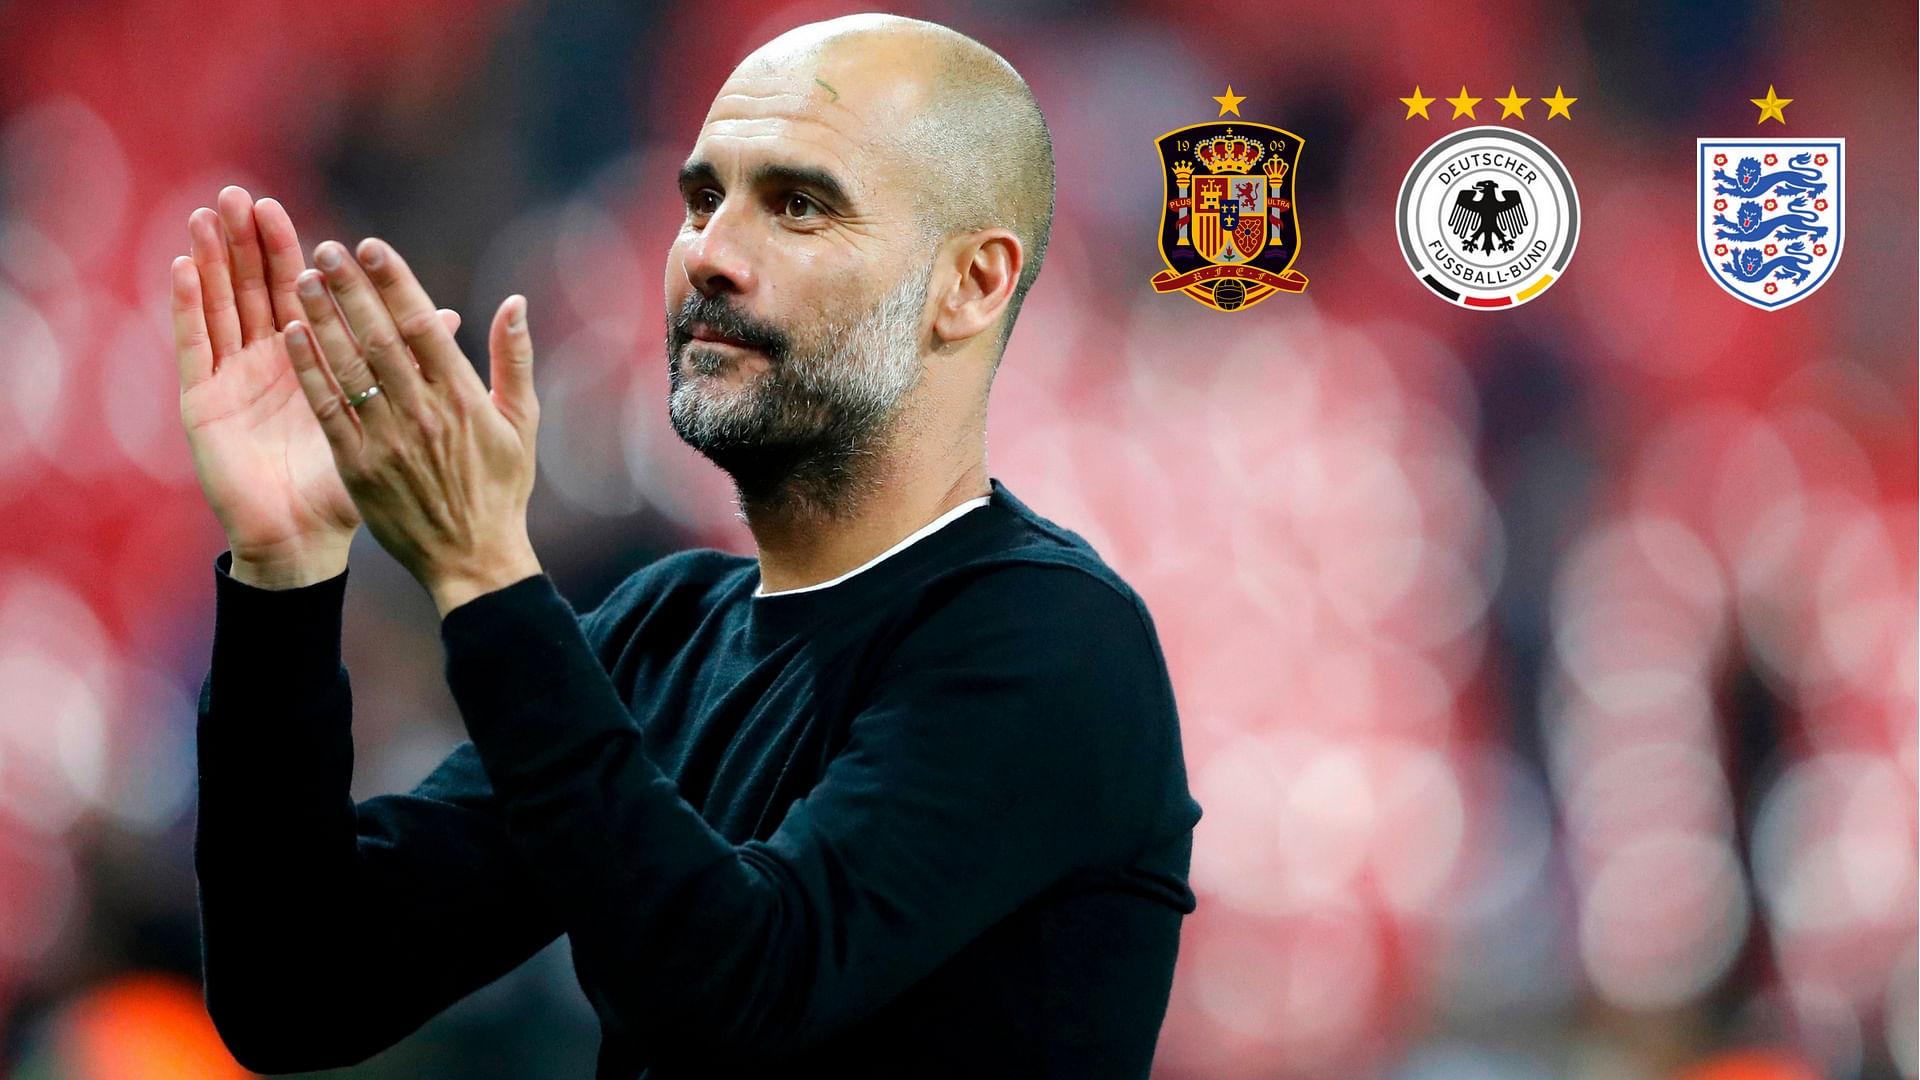 Pep Guardiola’s philosophy of passing has had an outsize impact on the last two World Cup winning teams